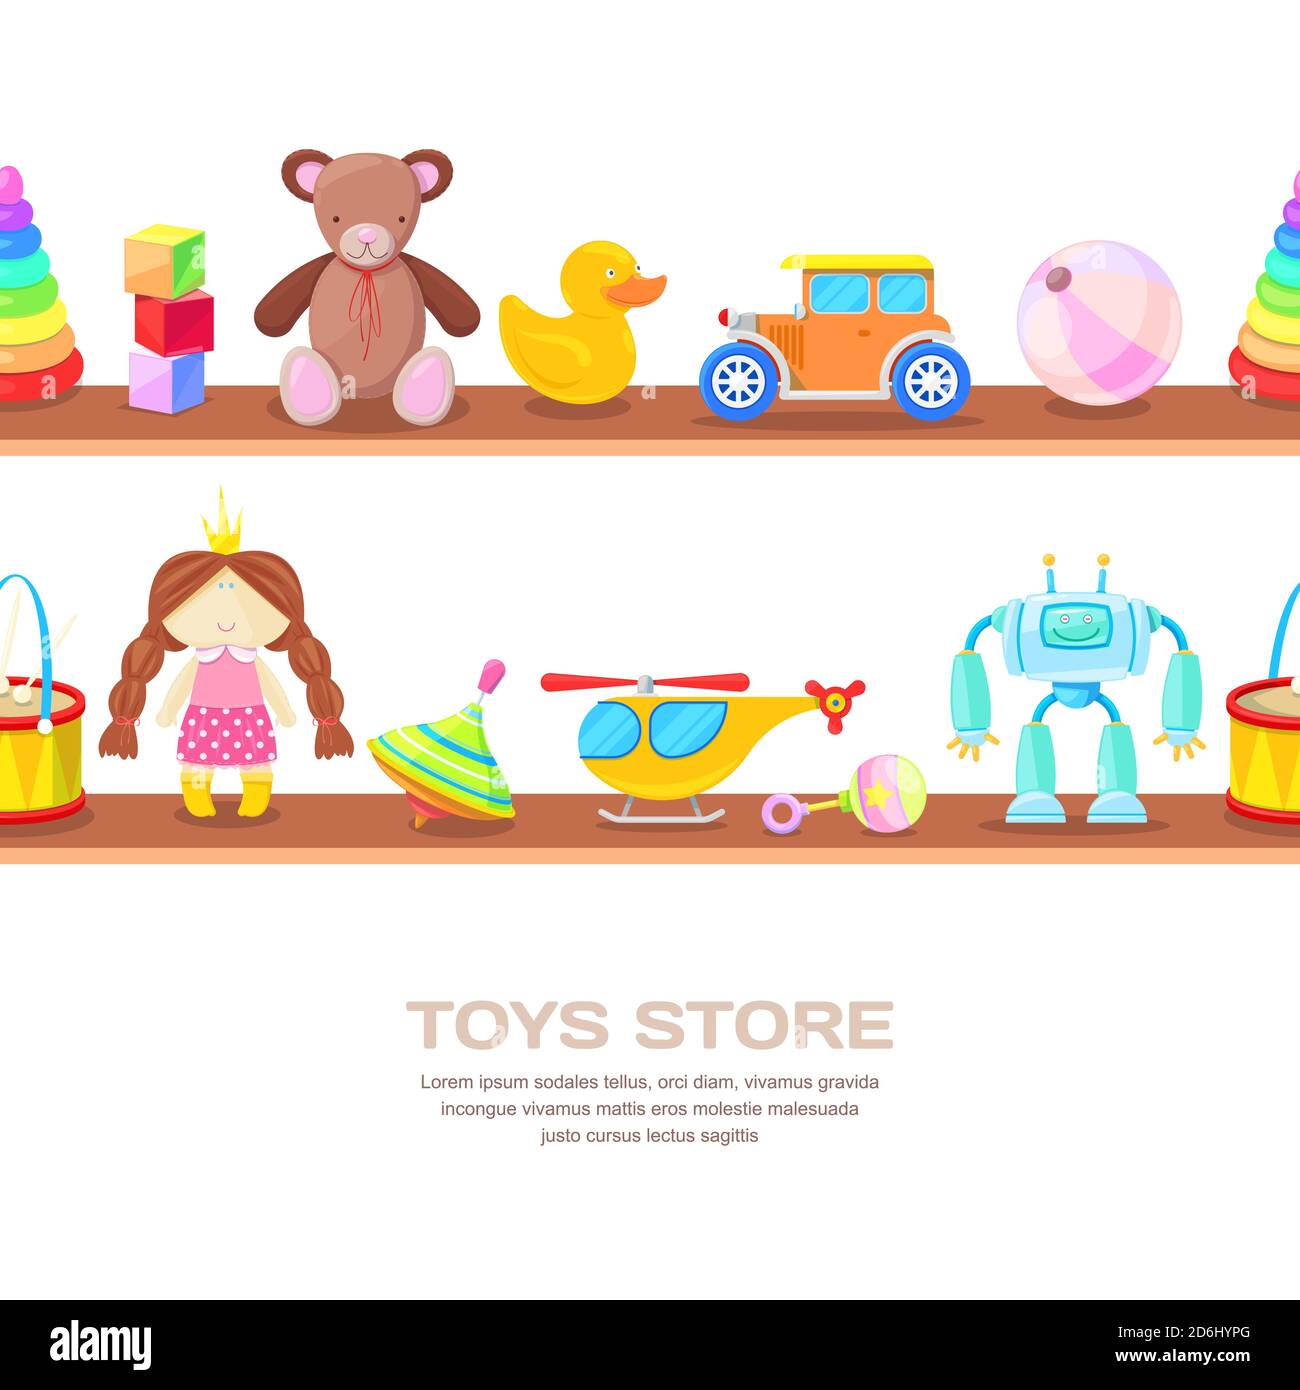 Wooden shelves with different kids toys, isolated illustration. Horizontal seamless vector white background. Stock Vector